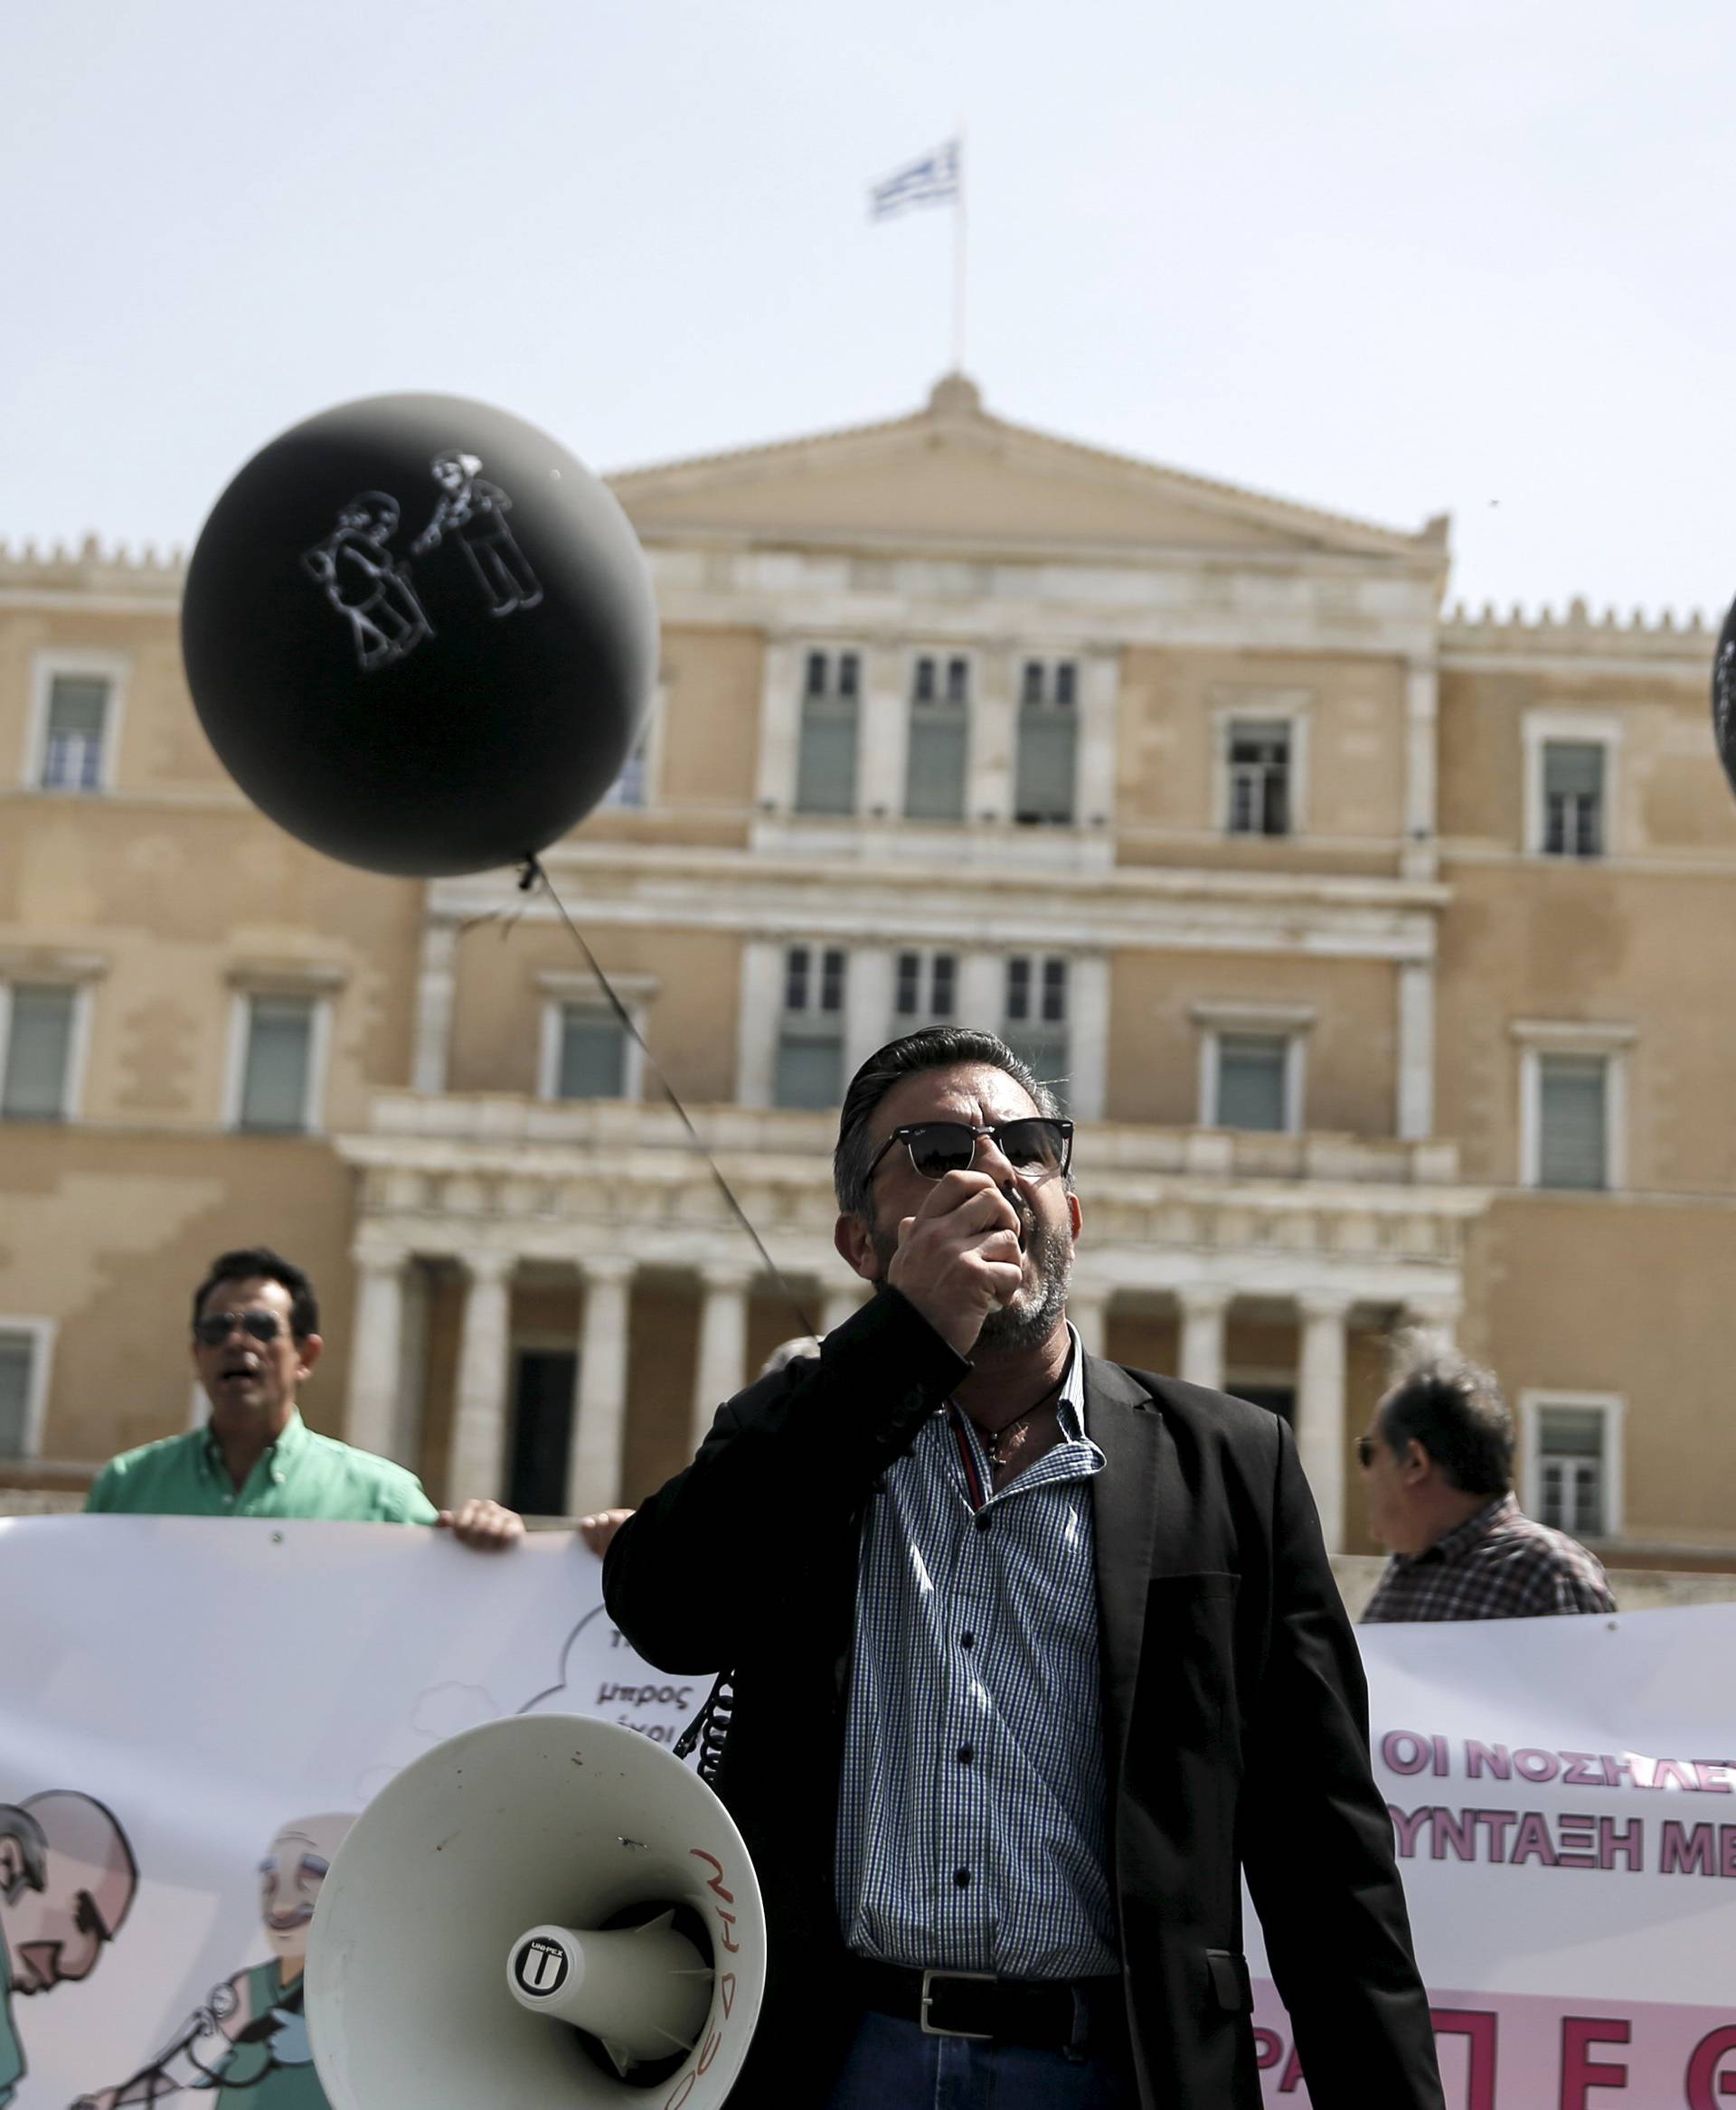 A protester shouts slogans through a loudspeaker in front of the parliament building, during a demonstration marking a 24-hour strike of the country's biggest public sector union ADEDY against planned tax and pension reforms in Athens